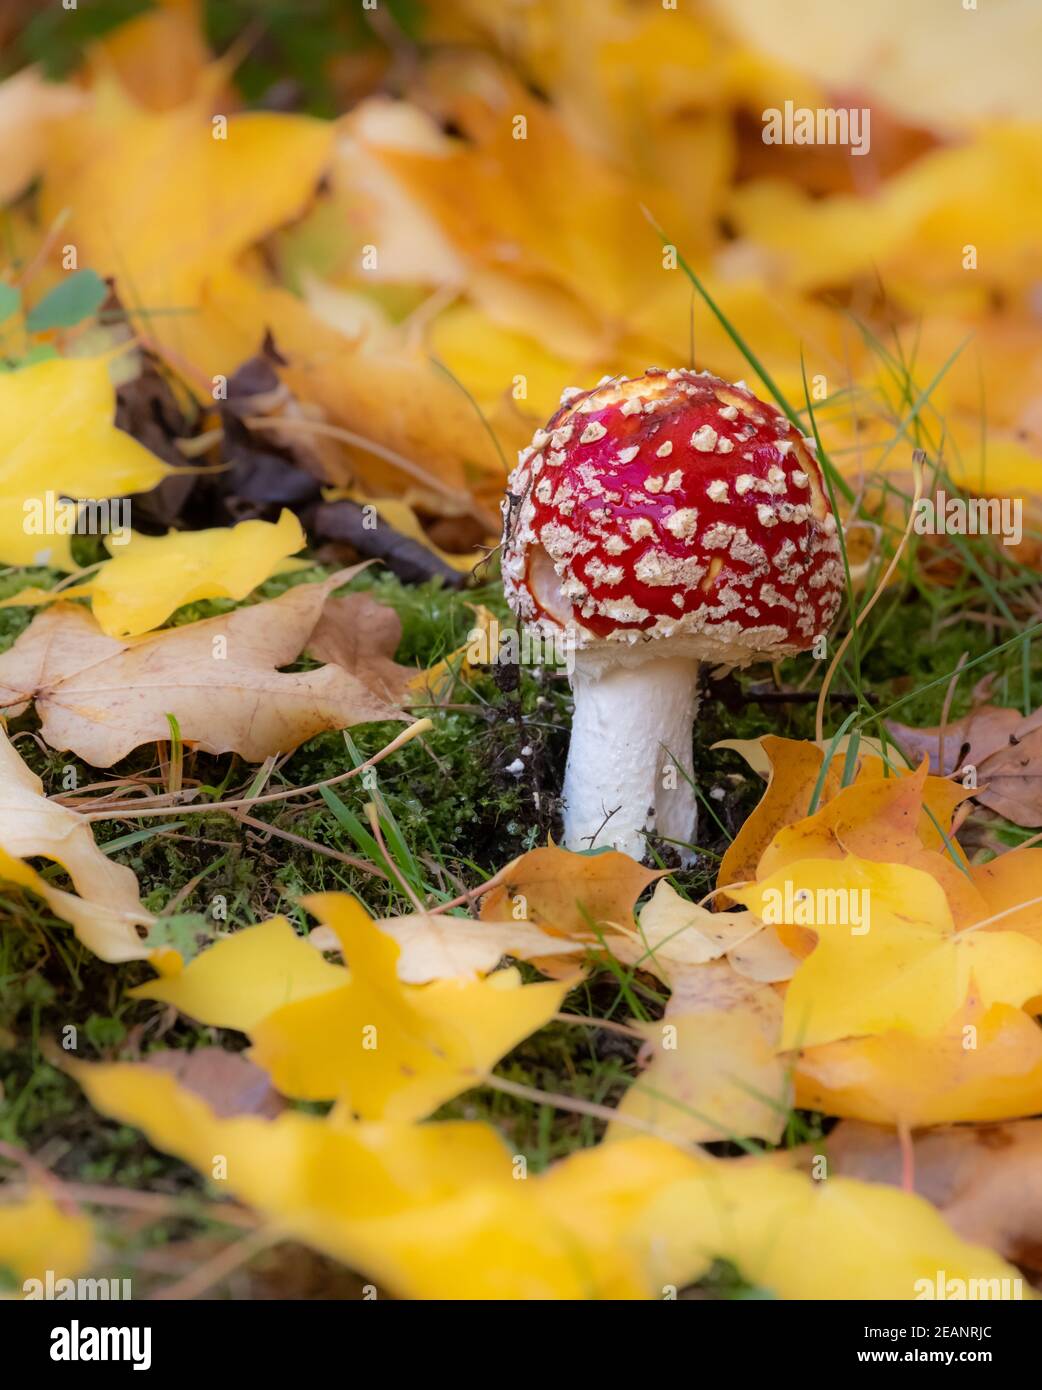 Rote Fliege Agaric Musrooms Stockfoto